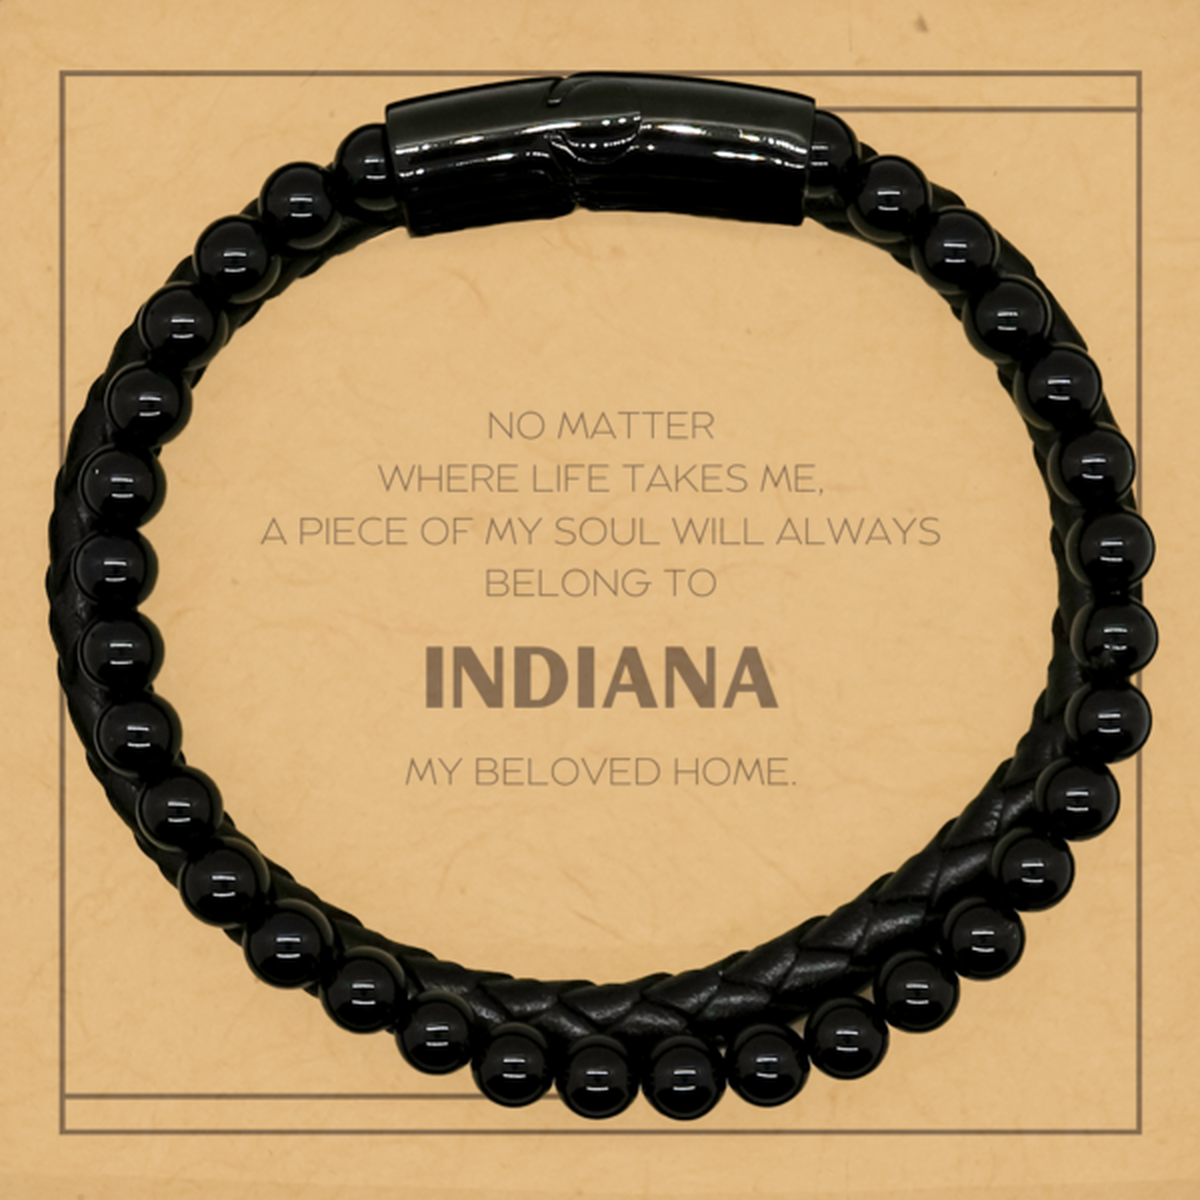 Love Indiana State Gifts, My soul will always belong to Indiana, Proud Stone Leather Bracelets, Birthday Unique Gifts For Indiana Men, Women, Friends